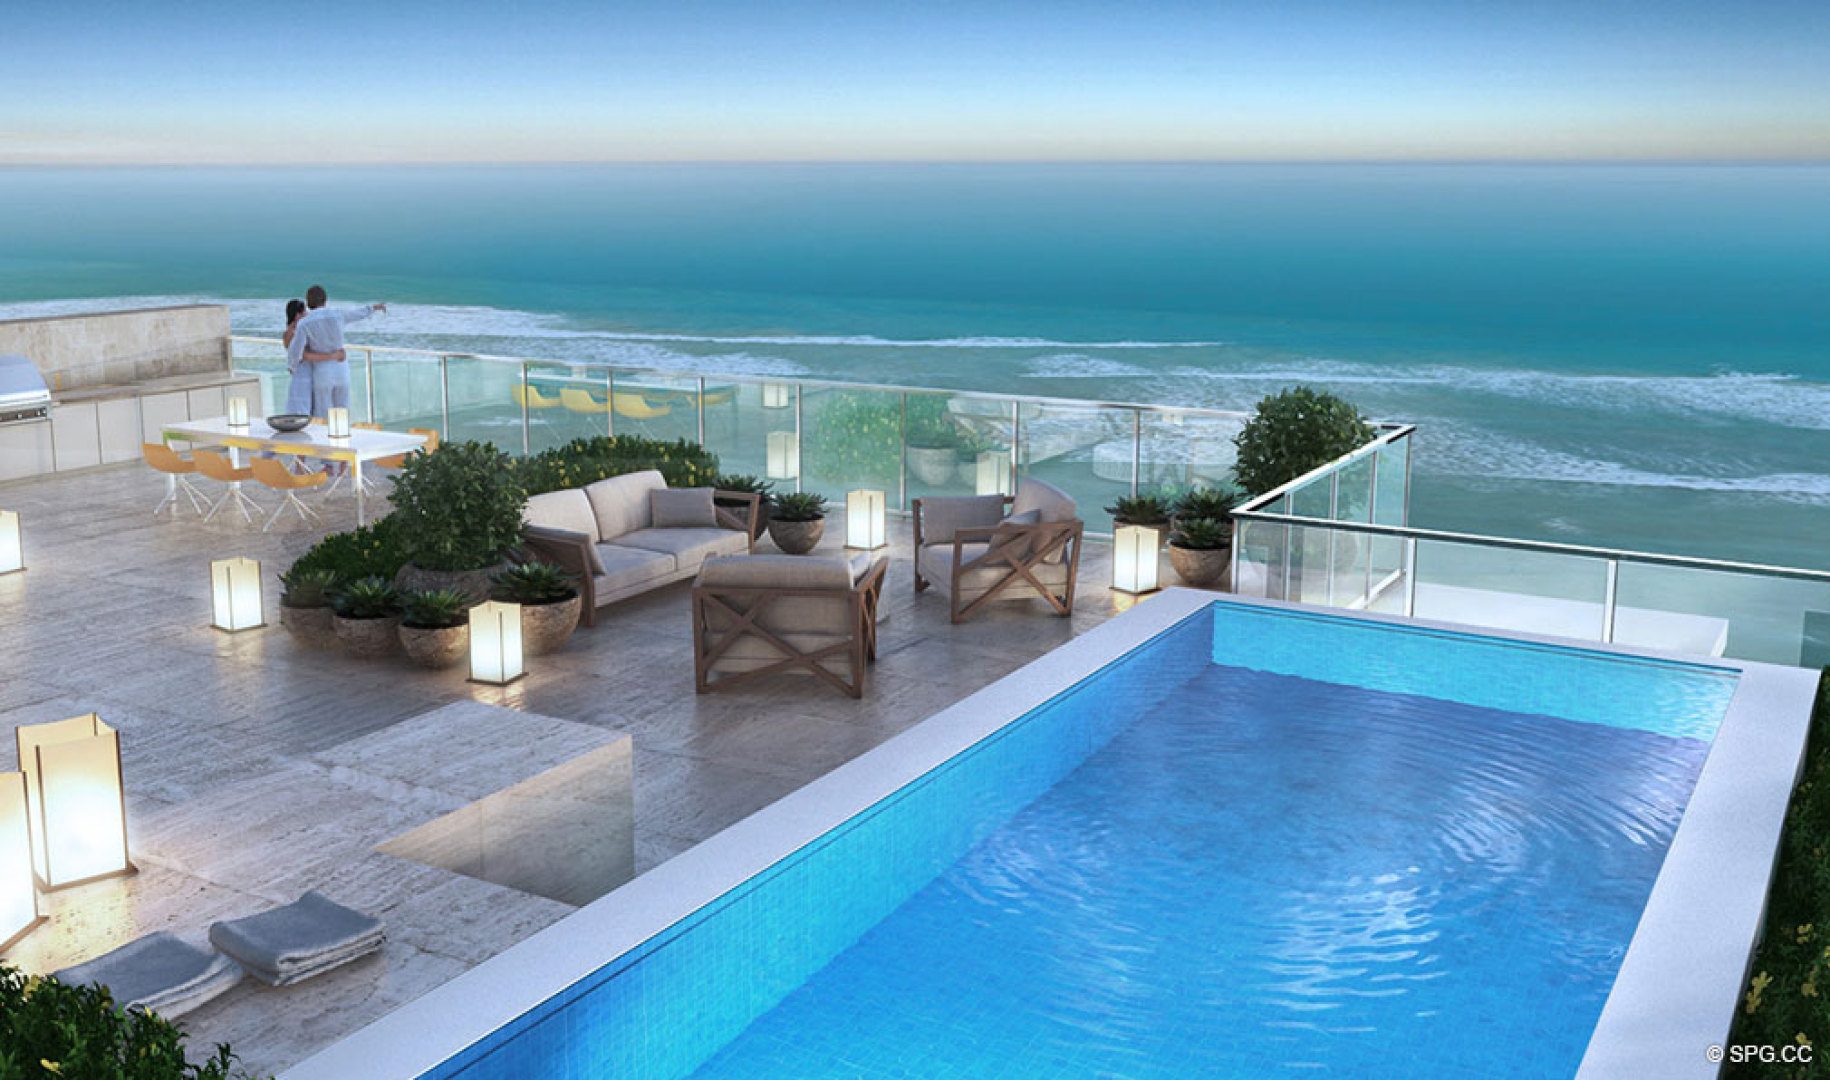 Private Rooftop Pool and Terrace at Sage Beach, Luxury Oceanfront Condos in Hollywood Beach Florida 33019